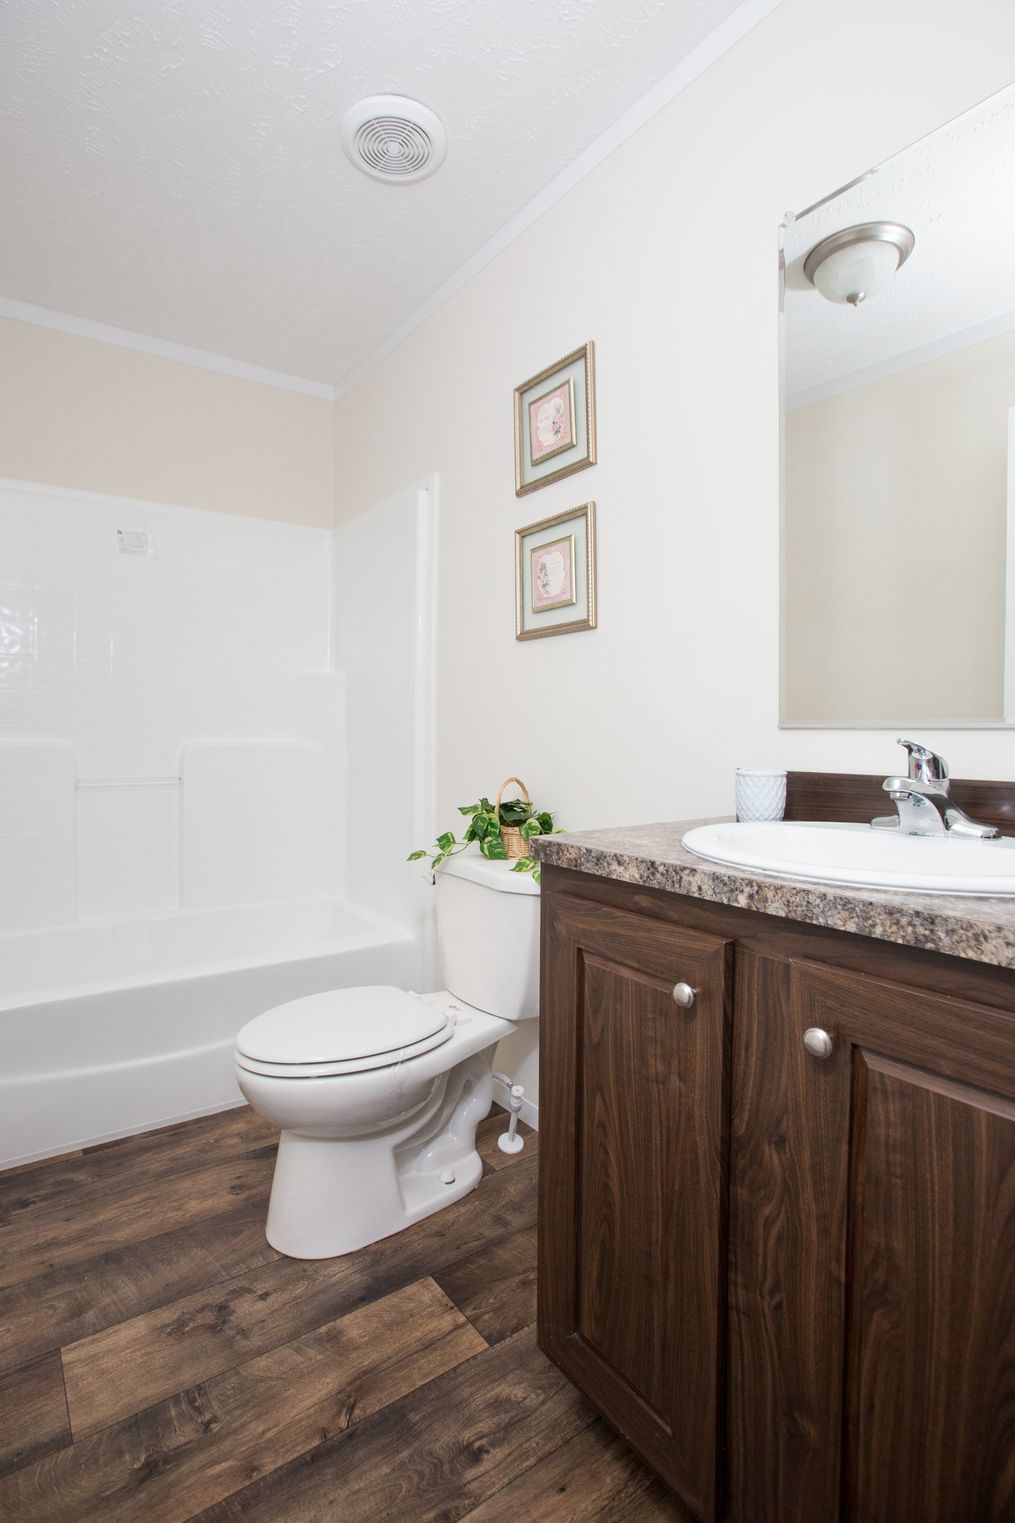 The RANGER 56B Guest Bathroom. This Manufactured Mobile Home features 3 bedrooms and 2 baths.